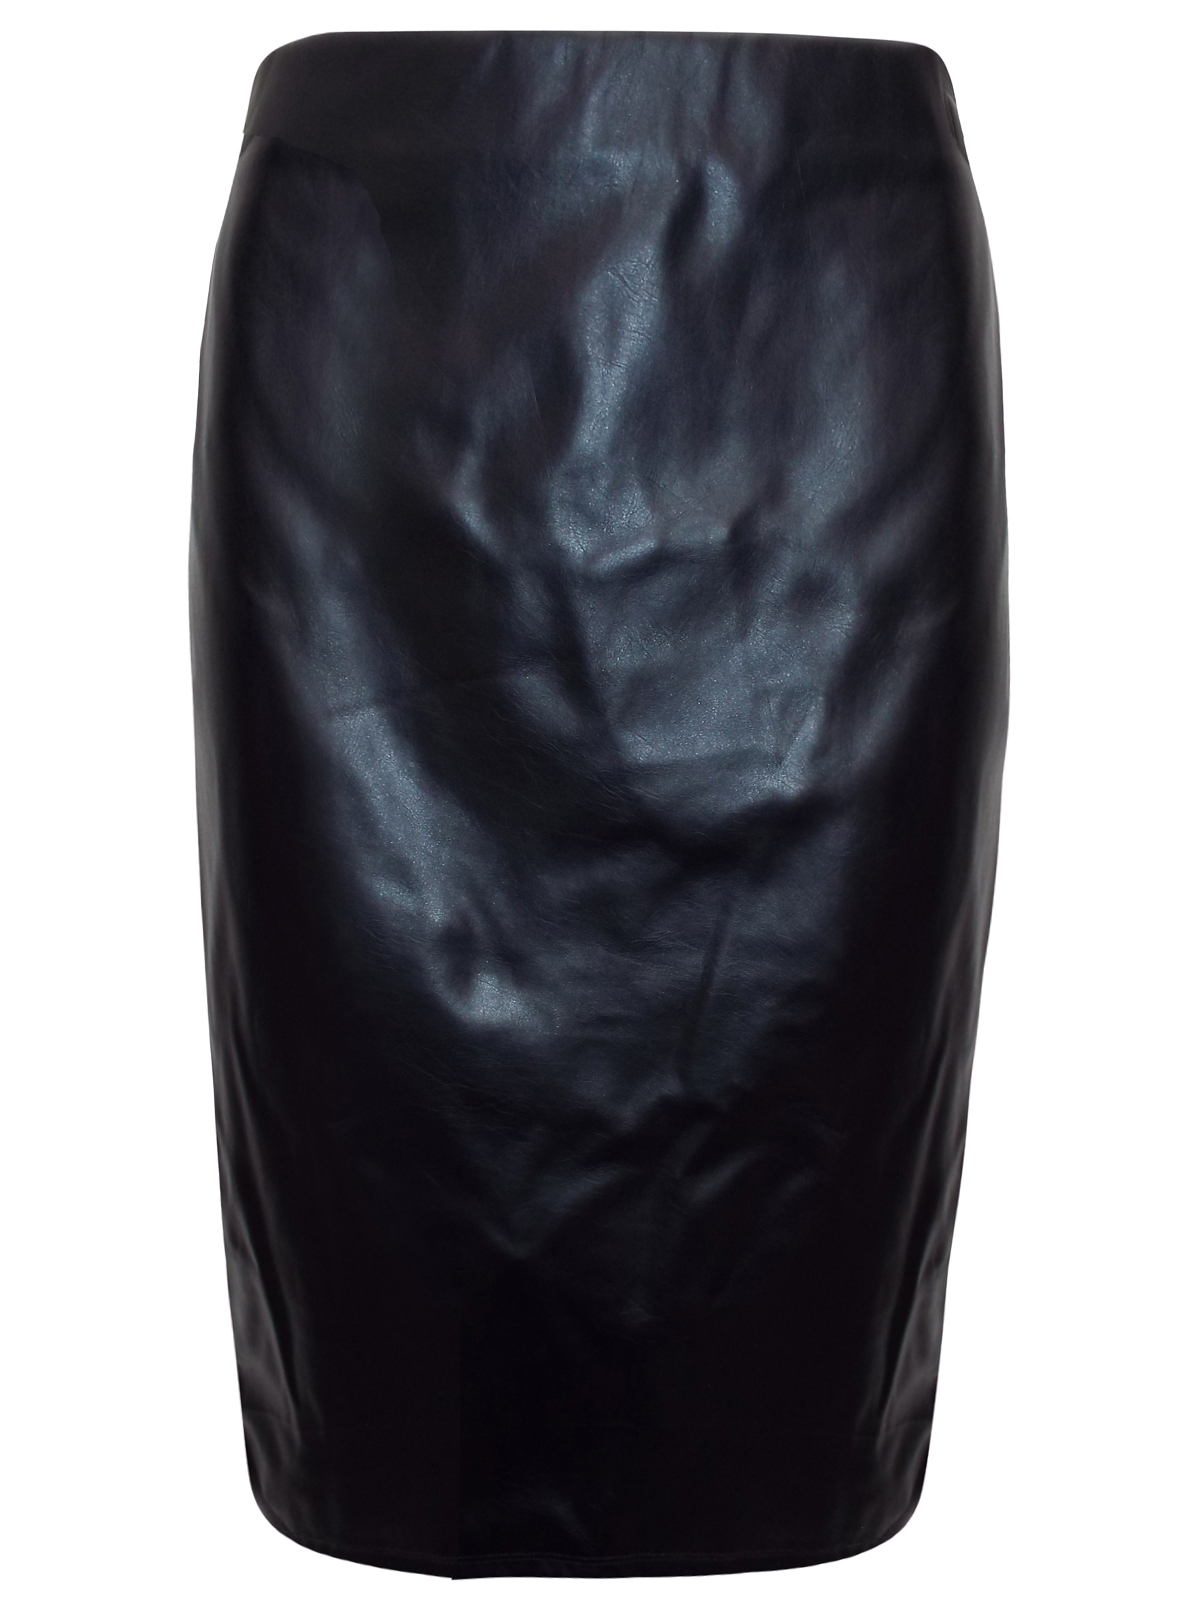 //text.. - - ASSORTED Ladies Pencil Skirts and Maxi Skirts - Size 10 to 18